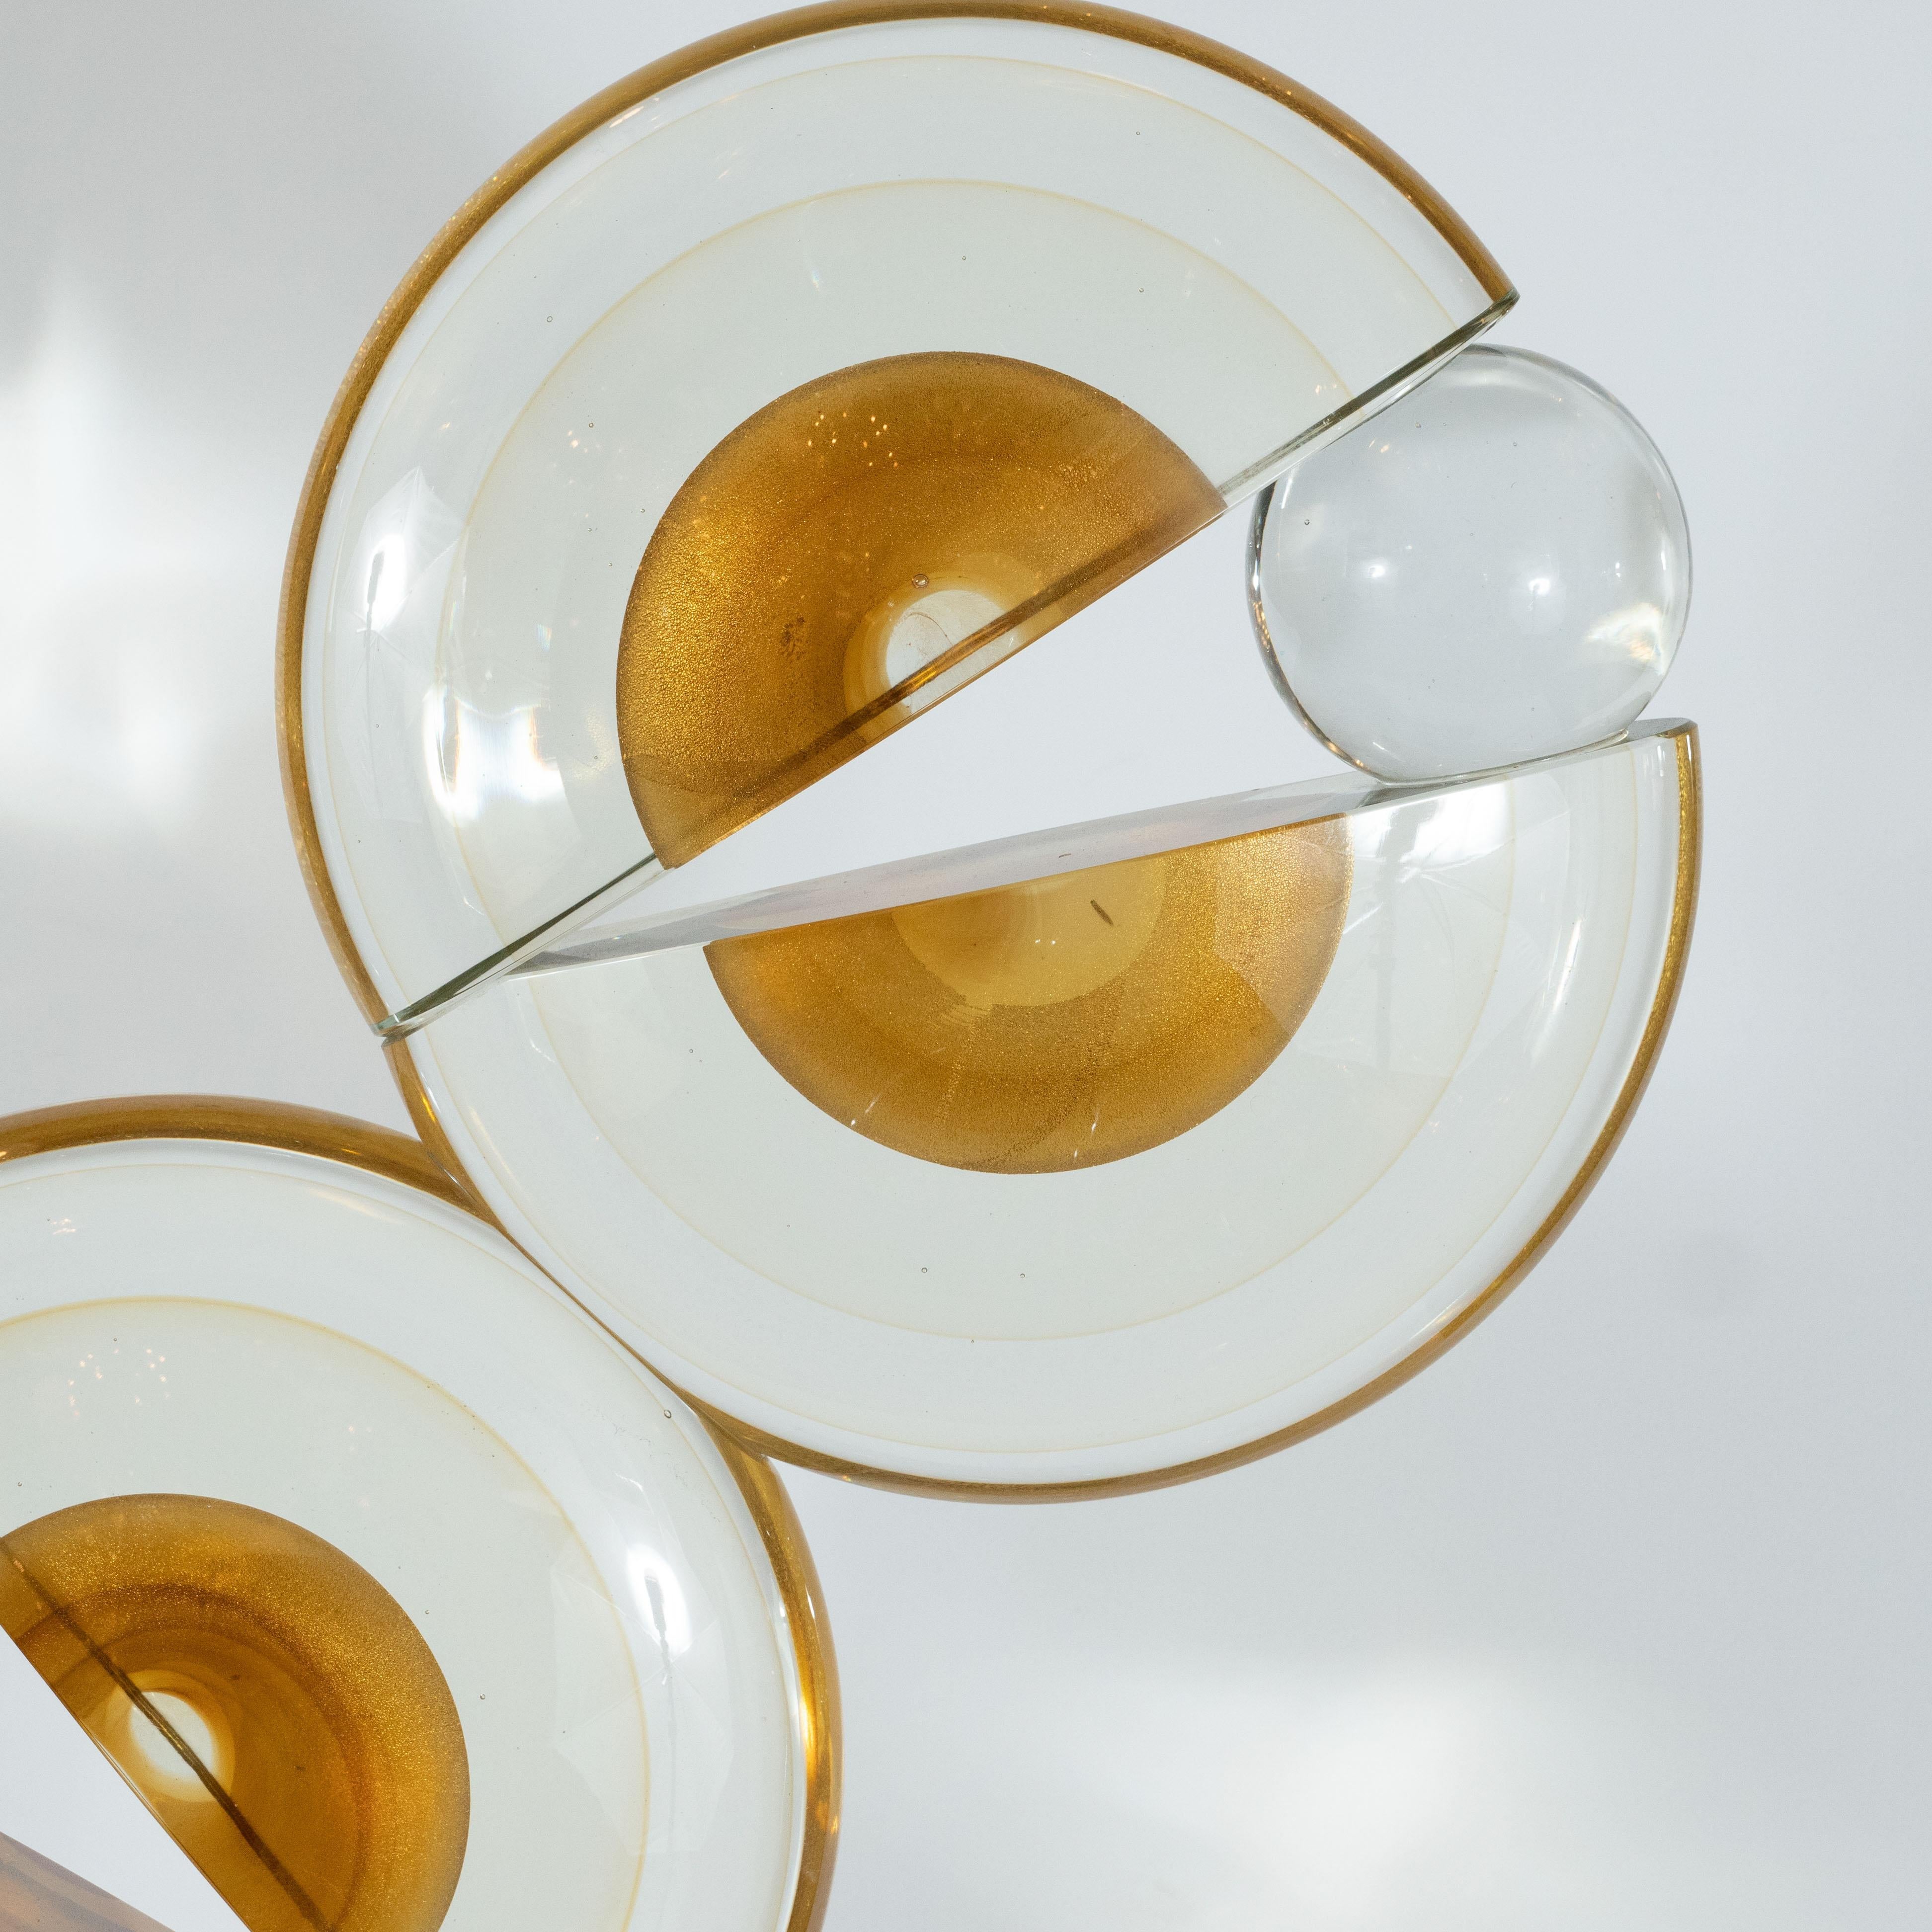 This dynamic modernist sculpture was hand blown in Murano, Italy- the island off the coast of Venice renowned for centuries for its superlative glass production. It features three spherical forms with circular embellishments in 24-karat gold, split